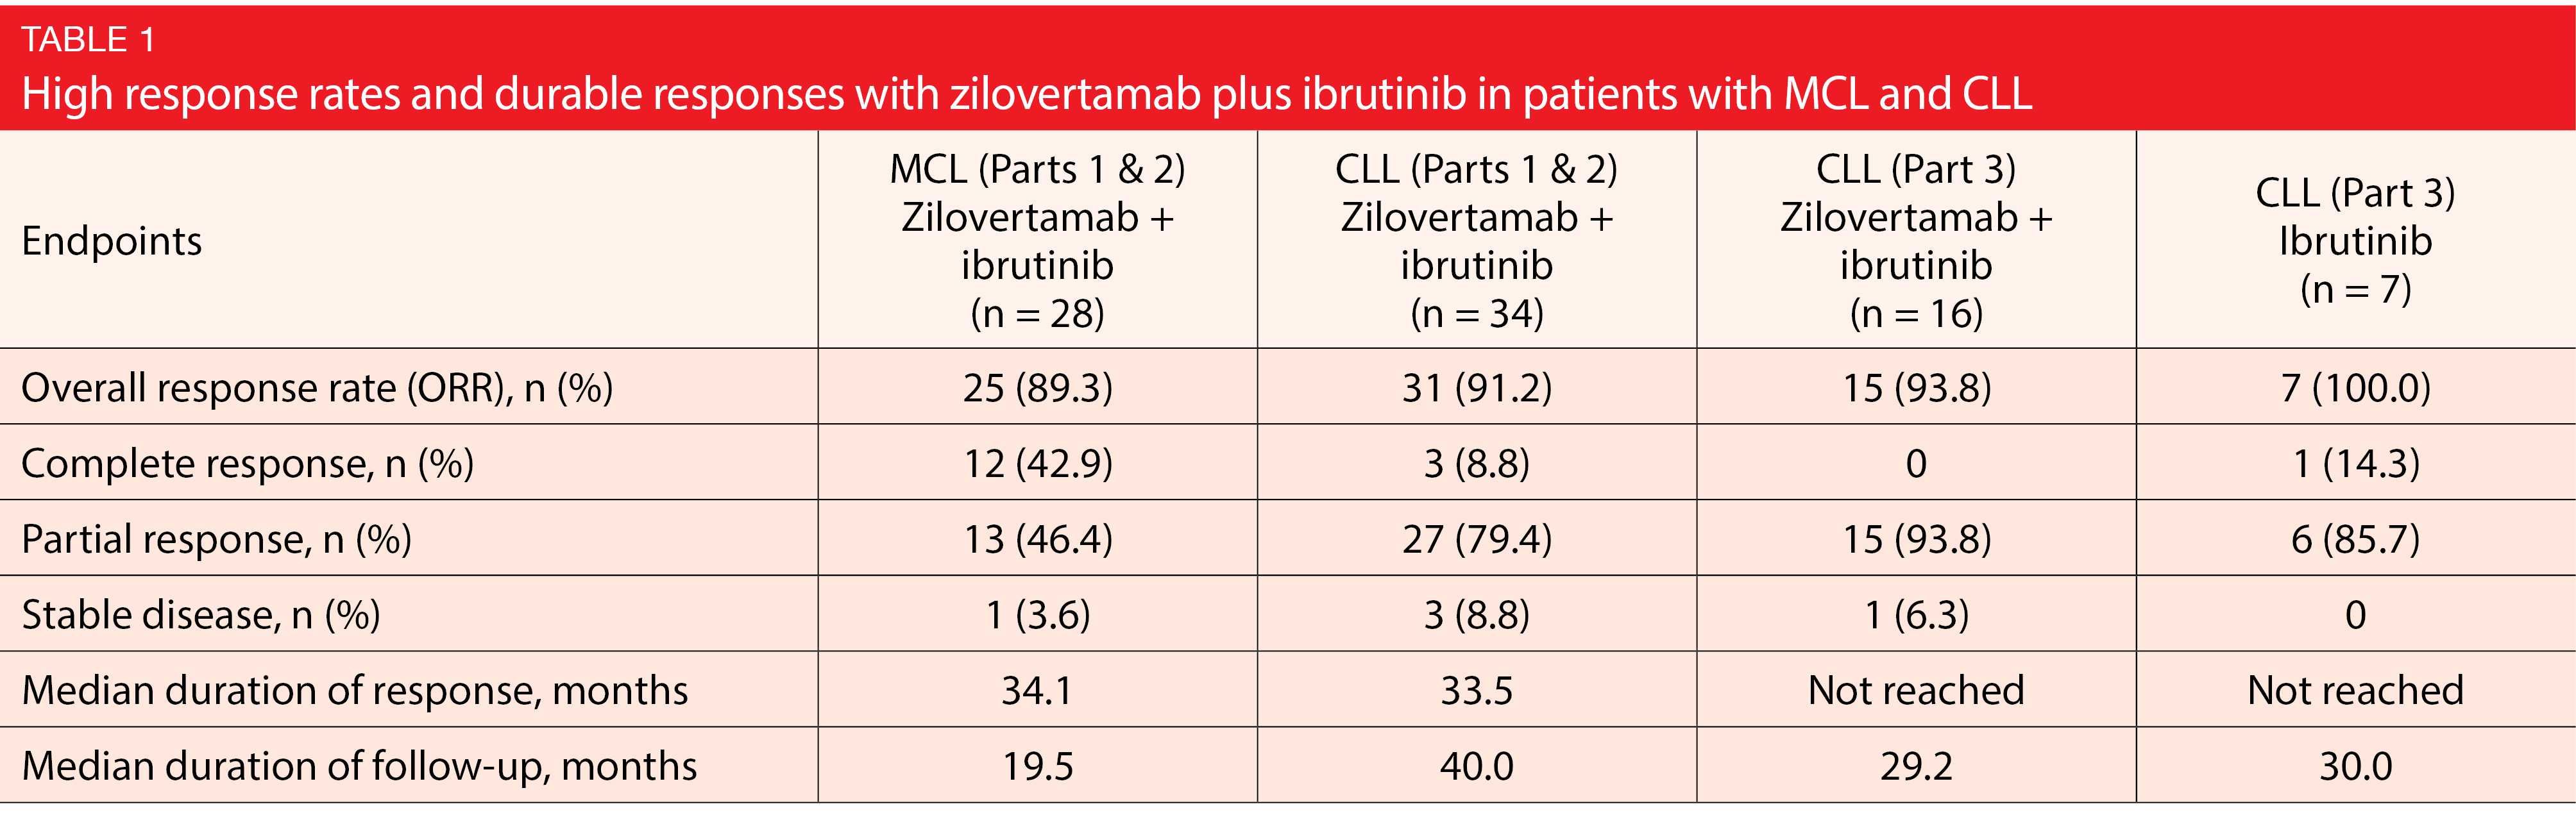 Table 1 High response rates and durable responses with zilovertamab plus ibrutinib in patients with MCL and CLL